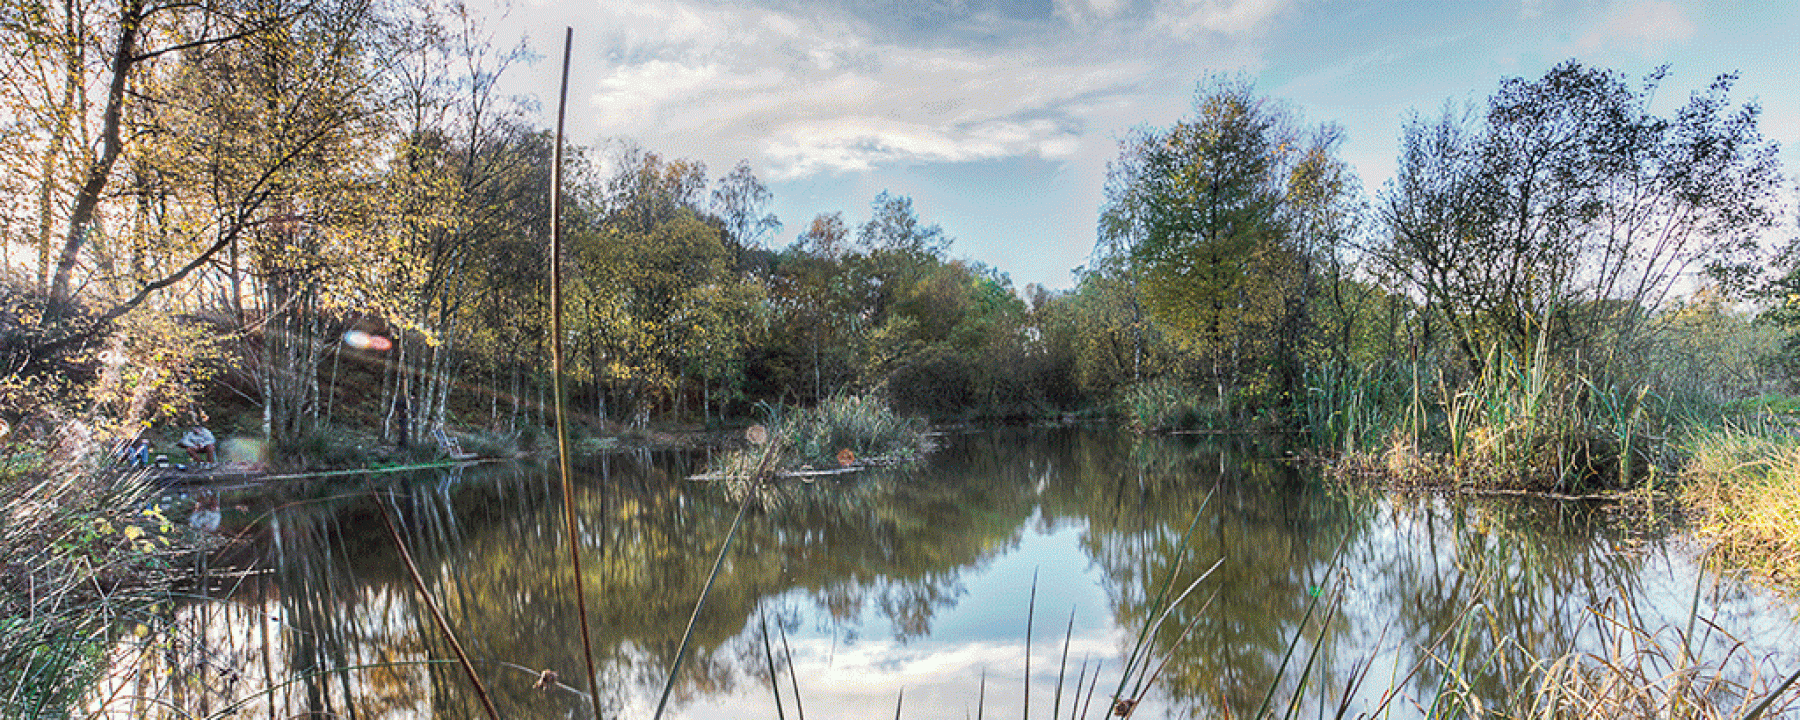 A picture of the secluded Birch Ponds at Magiscroft Fishery